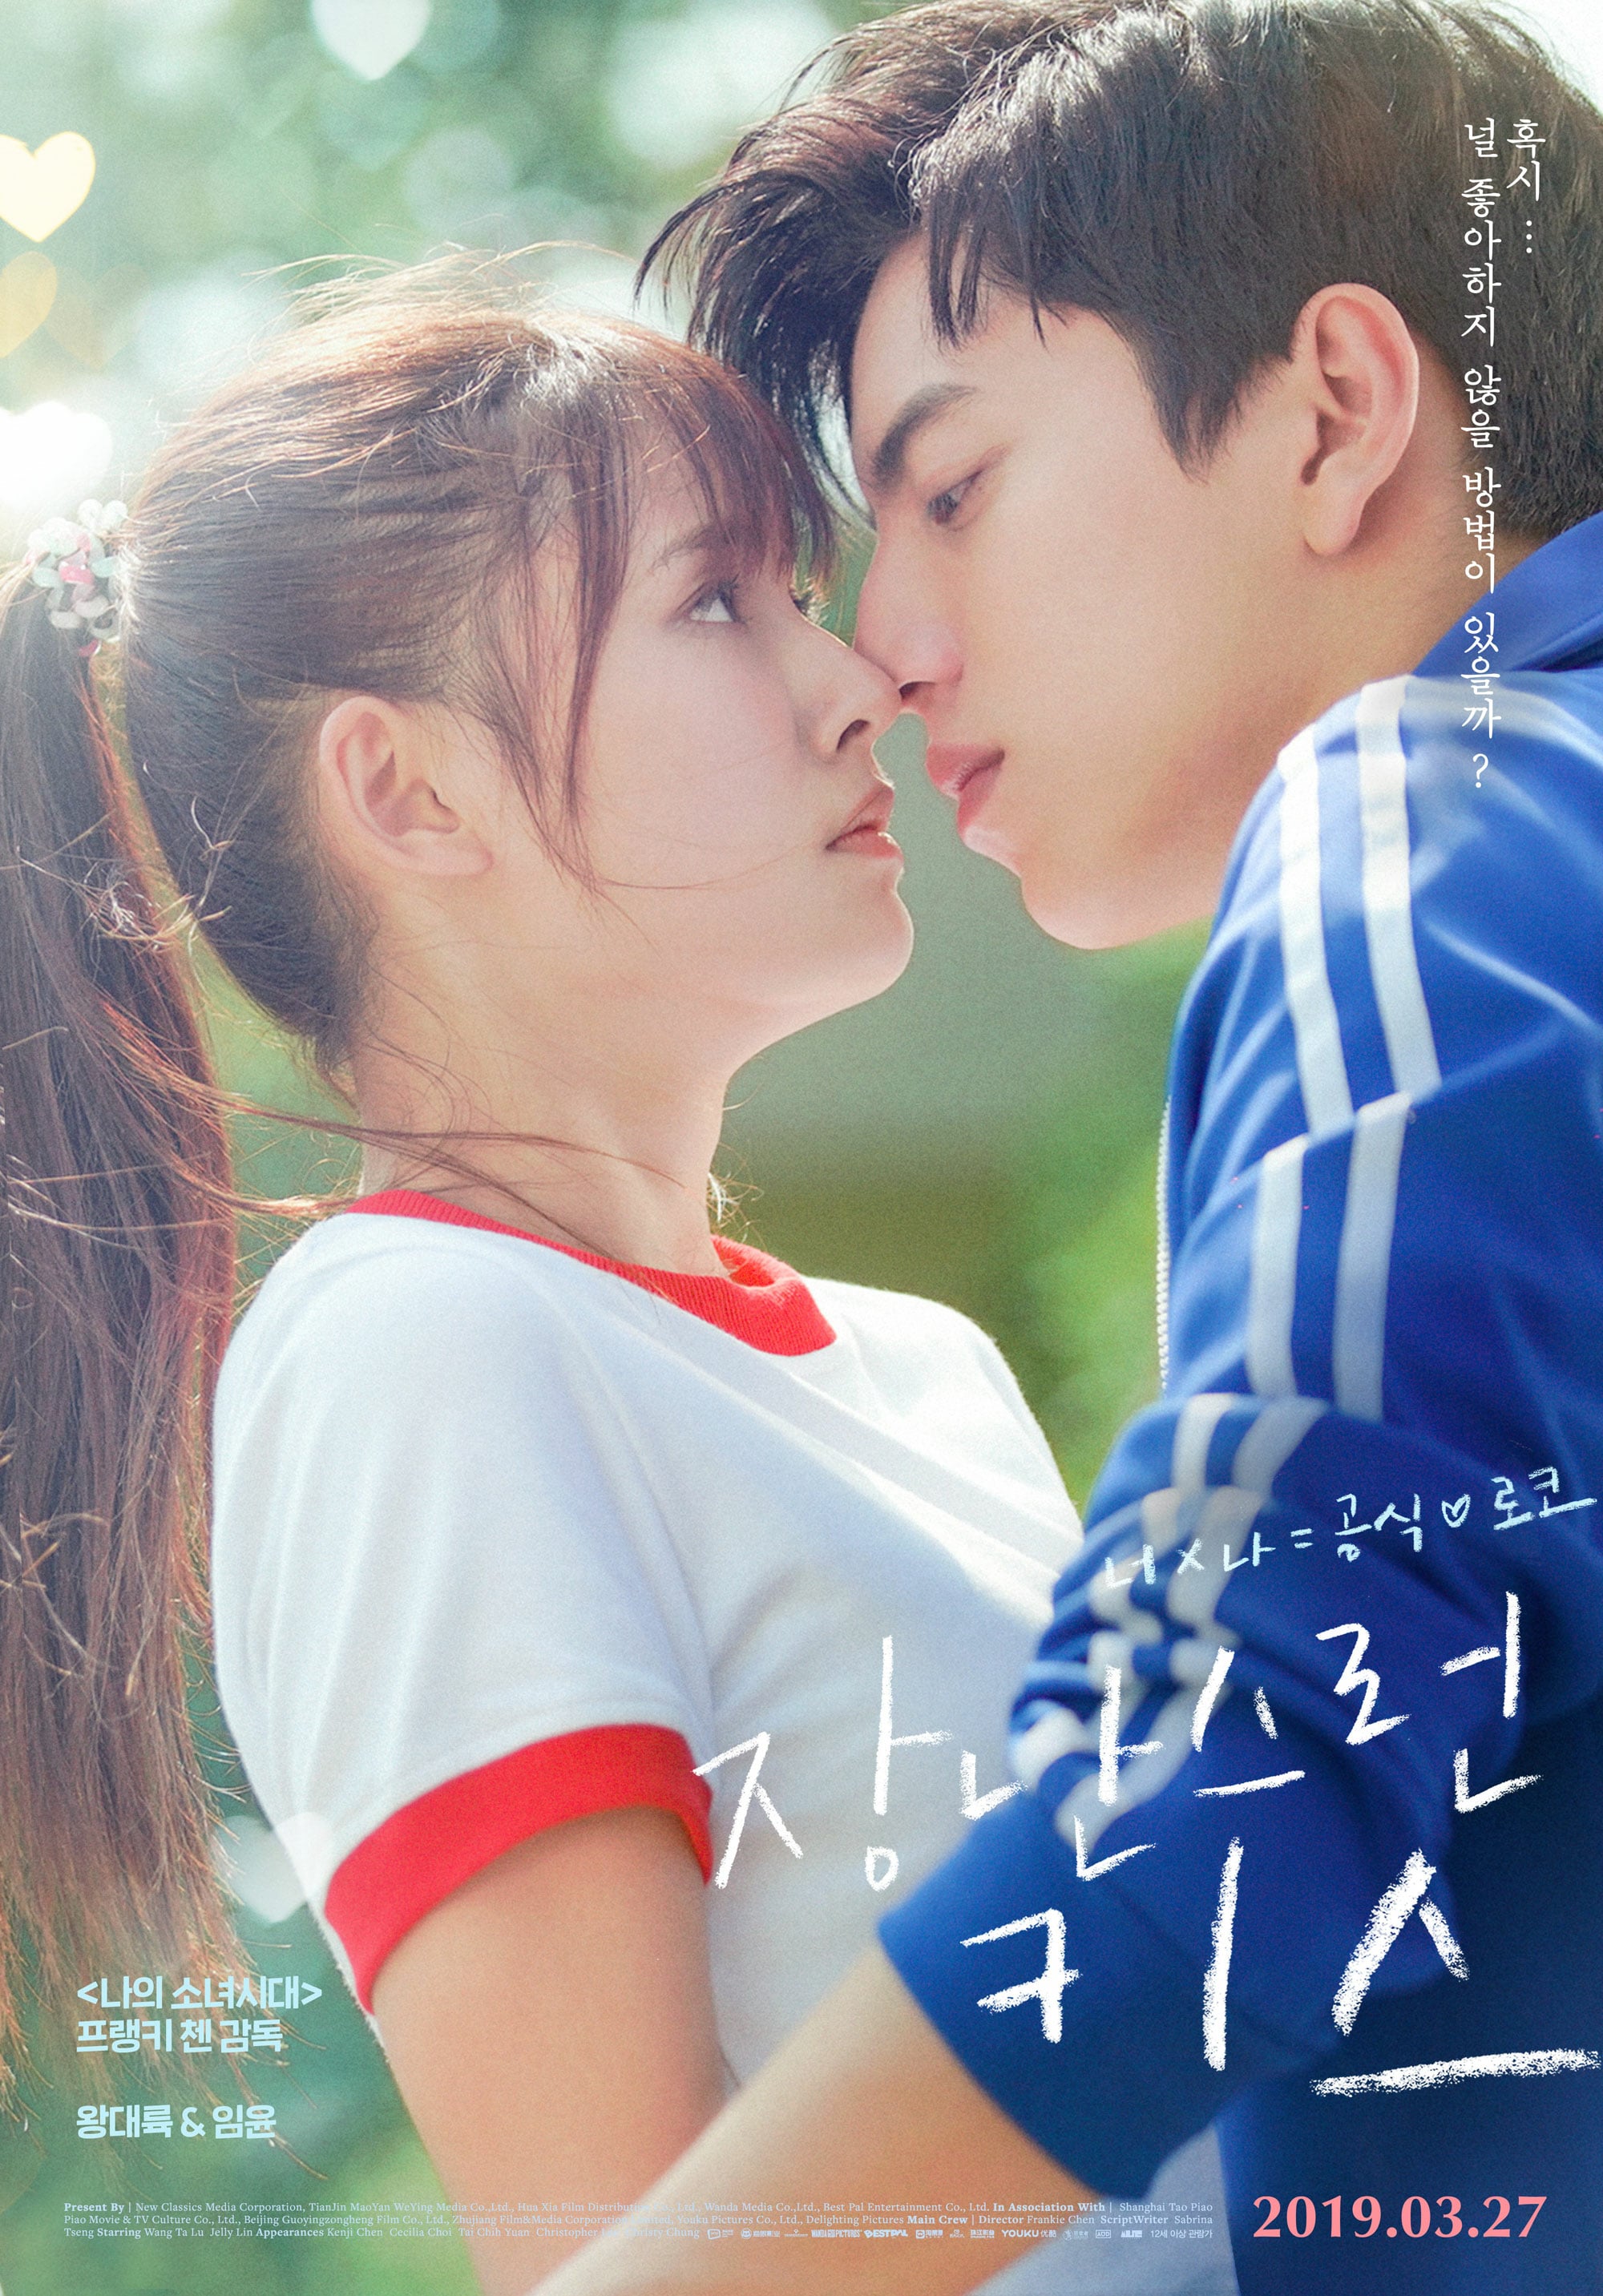 360 Movies on Twitter: 'Fall in Love at First Kiss (2019) Korean Full movie  download in HD https://t.co/9TxxkOIHJf Fall in Love at First Kiss is a 2019  Taiwanese romance film directed by